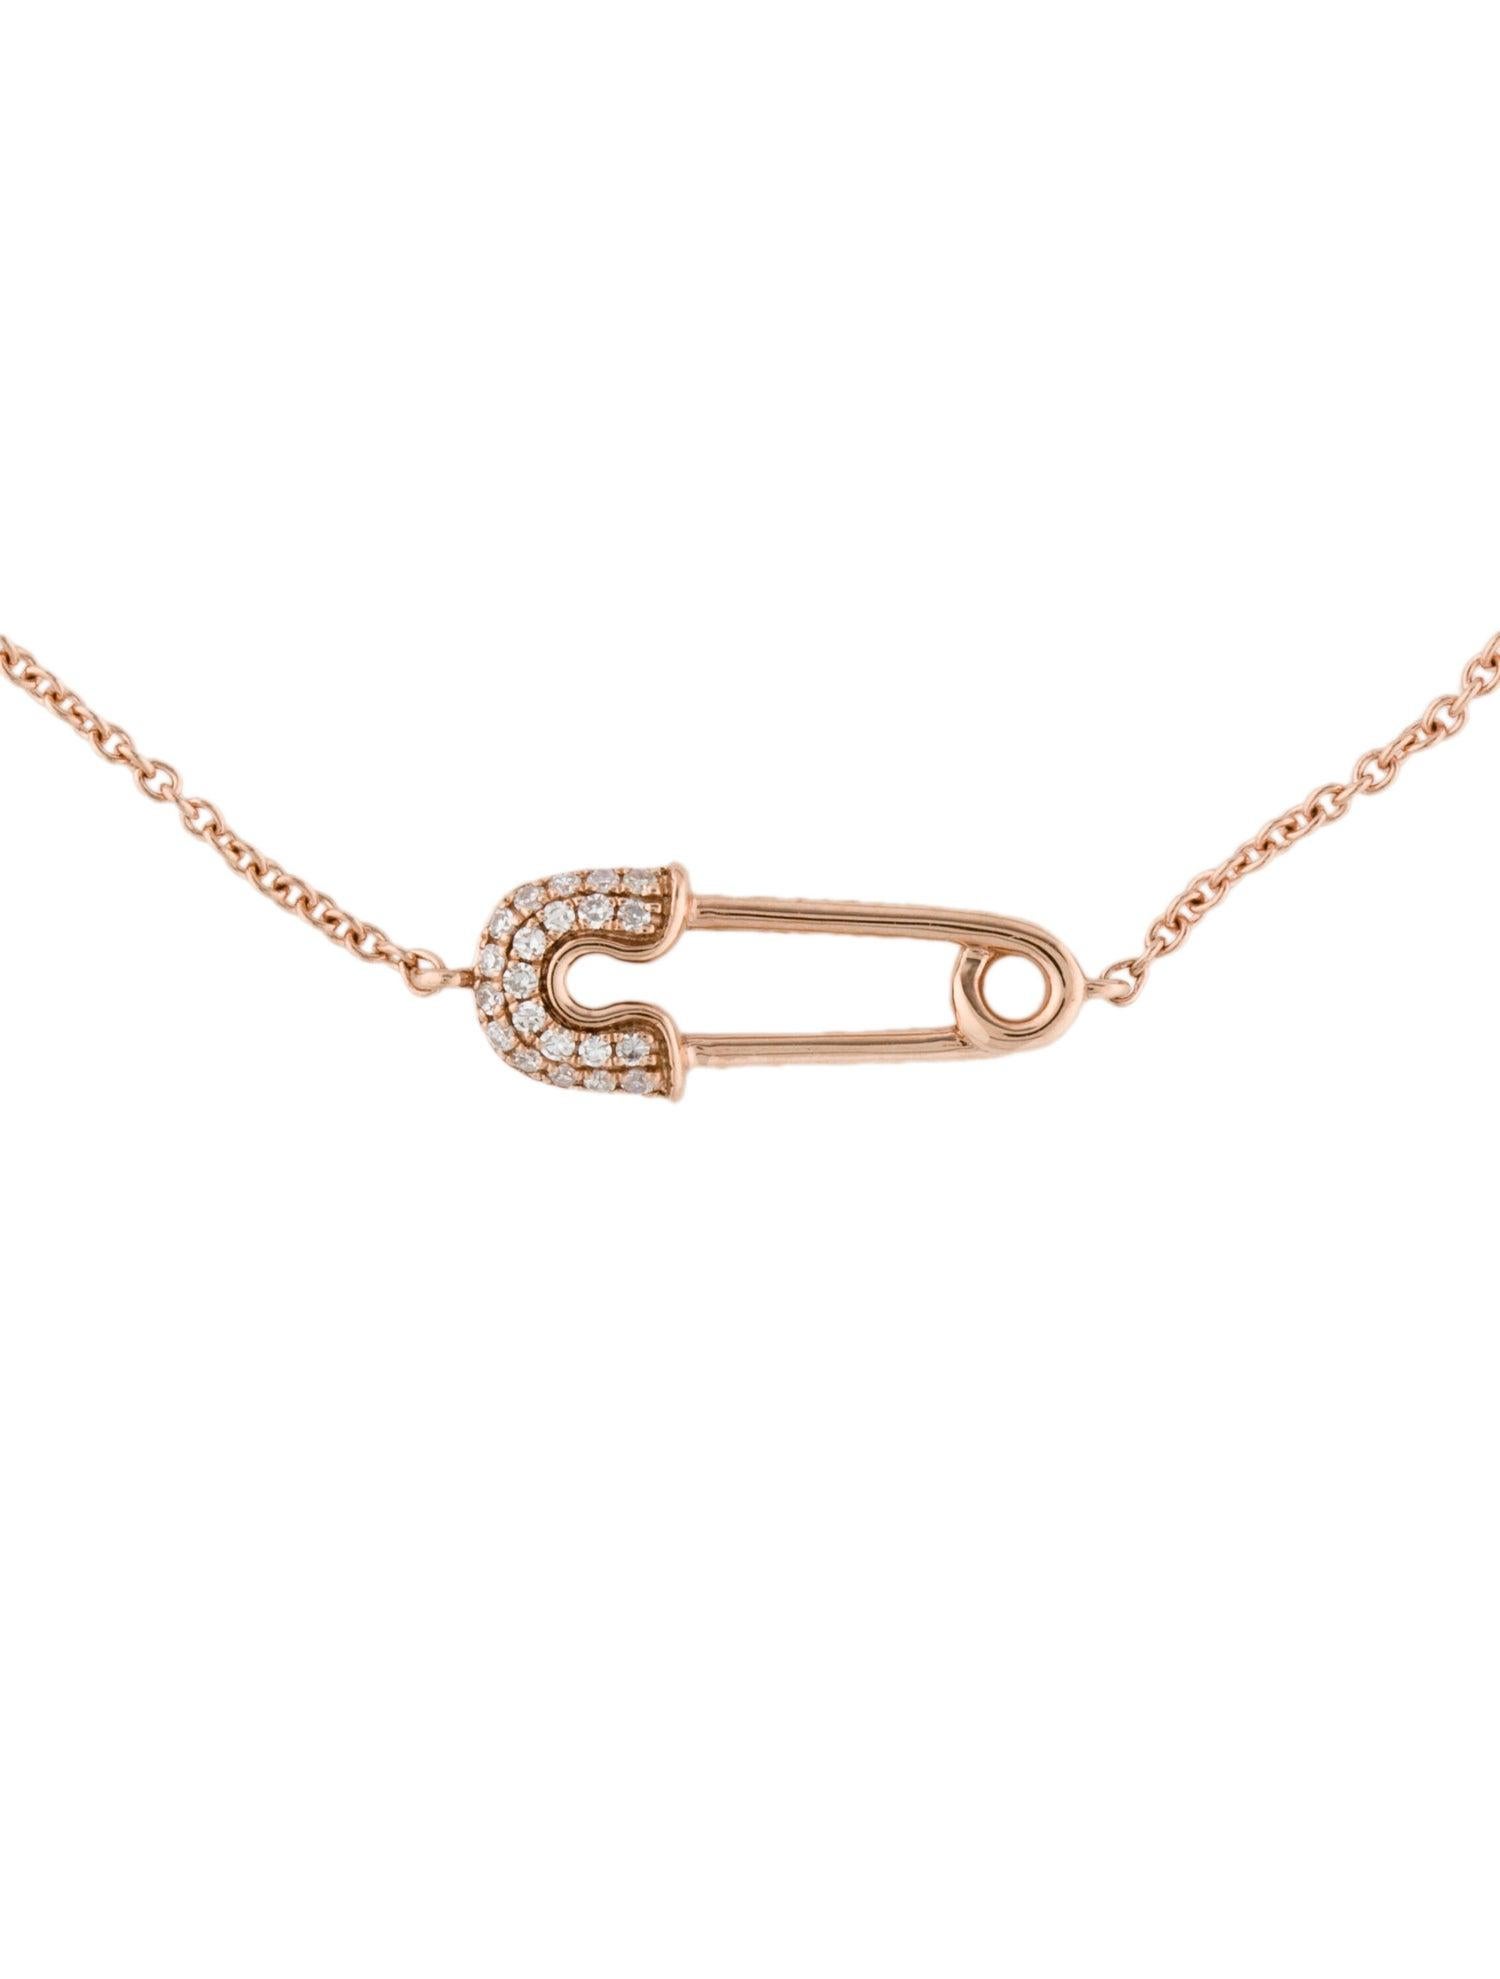 This Dainty Safety pin Bracelet is crafted of 14K rose Gold and features 0.07 carats of natural round white Diamonds. Bracelet length is adjustable 6.75